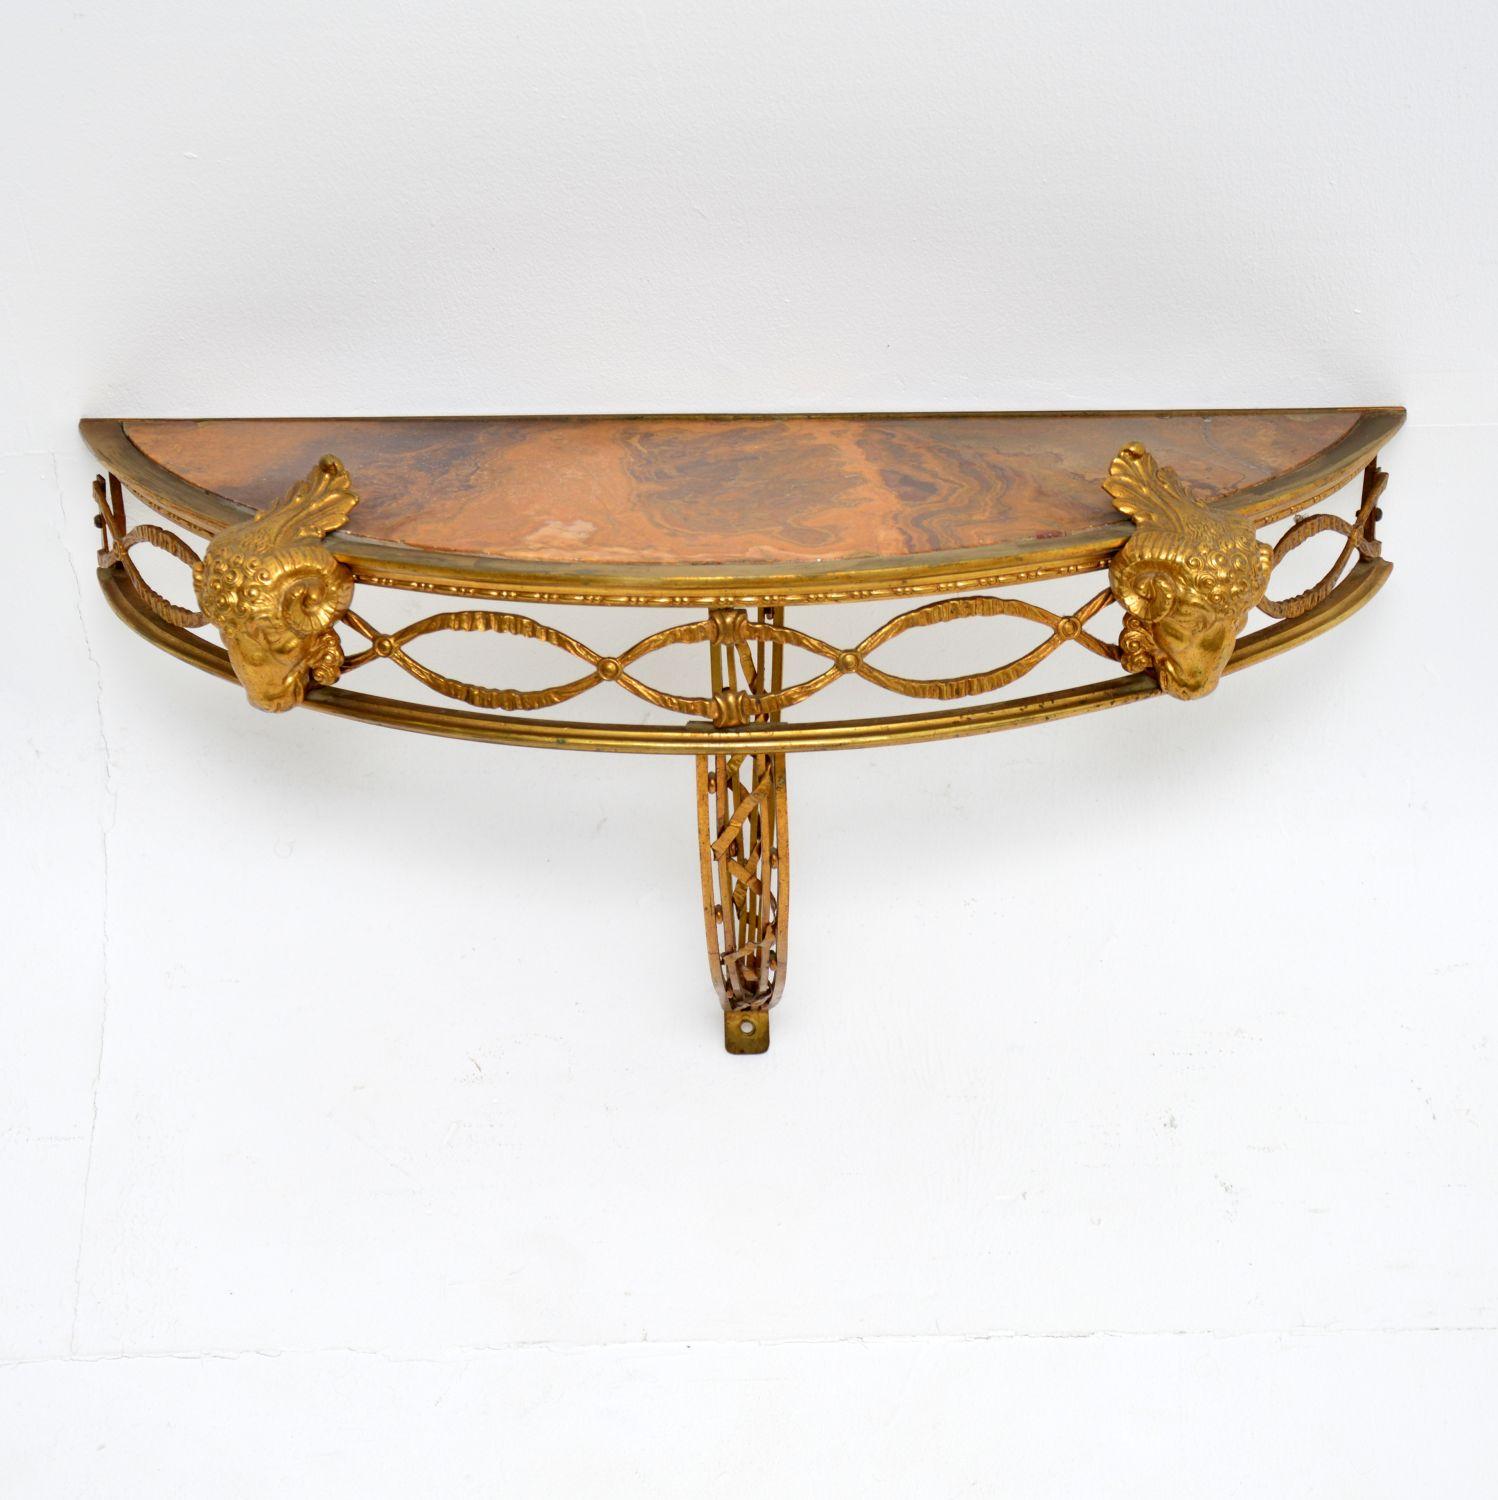 A stunning antique French wall mounting side table in gilt bronze with a marble top, dating from around the 1890-1900 period.

The quality is absolutely superb, the metal work is finely crafted and beautifully designed, with intricate details,